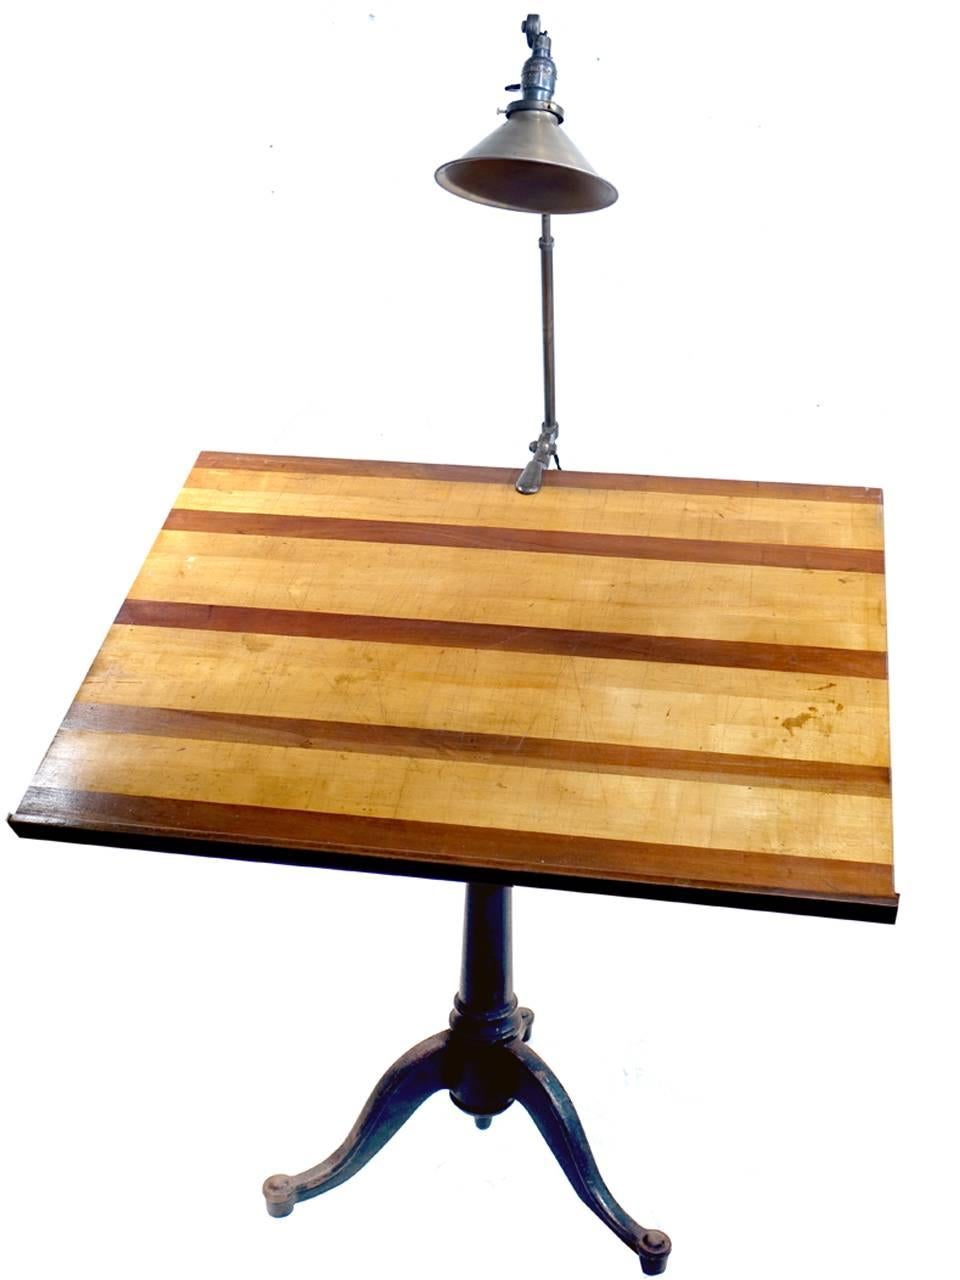 This is the quintessential architects drawing table. An articulating cast iron base and a beautiful contrasting wood drawing board. The table turns, moves up and down and tilts. In addition it comes with a beautiful and very sought after all brass